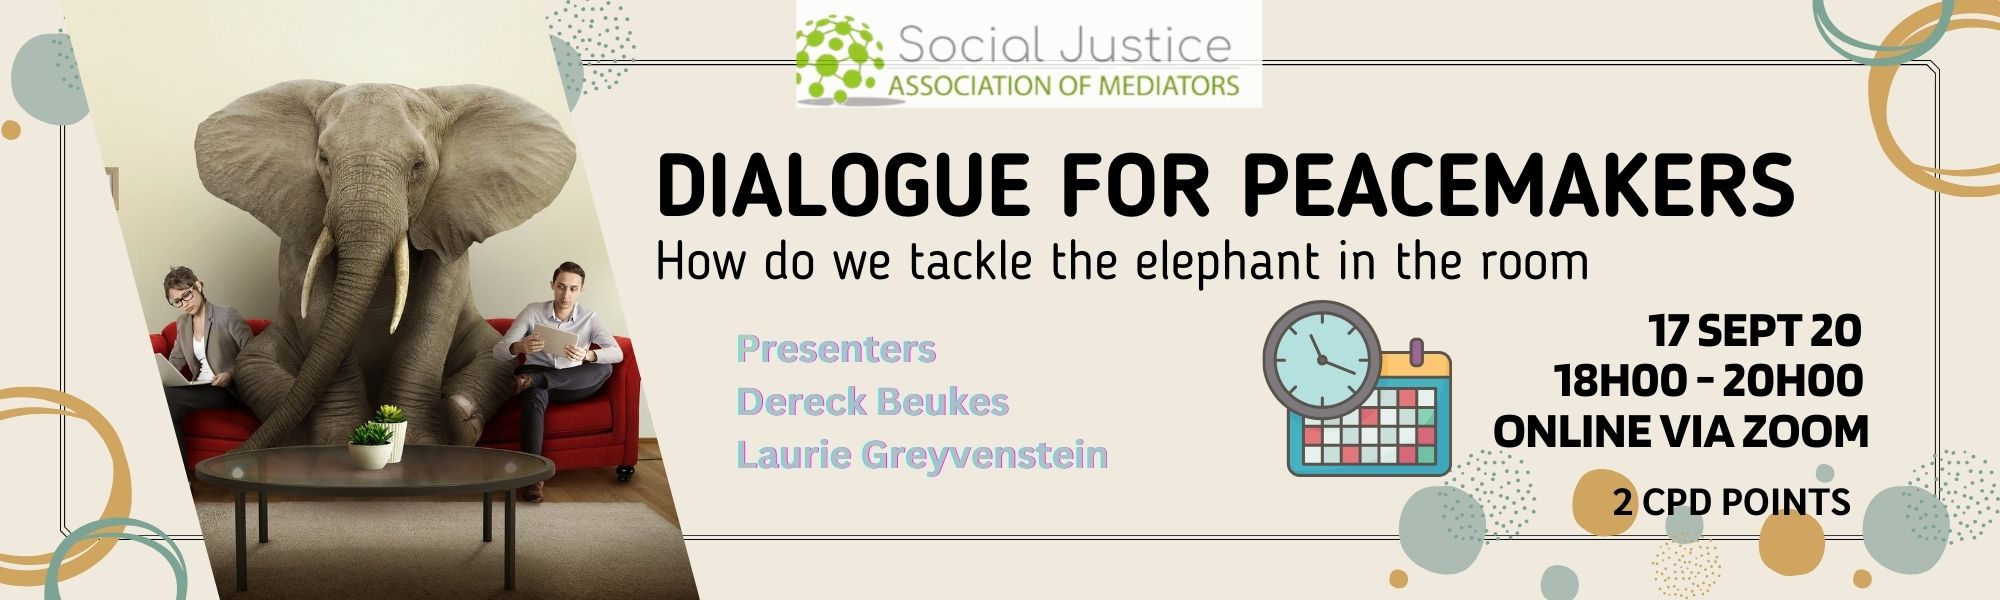 How do we tackle the elephant in the room?